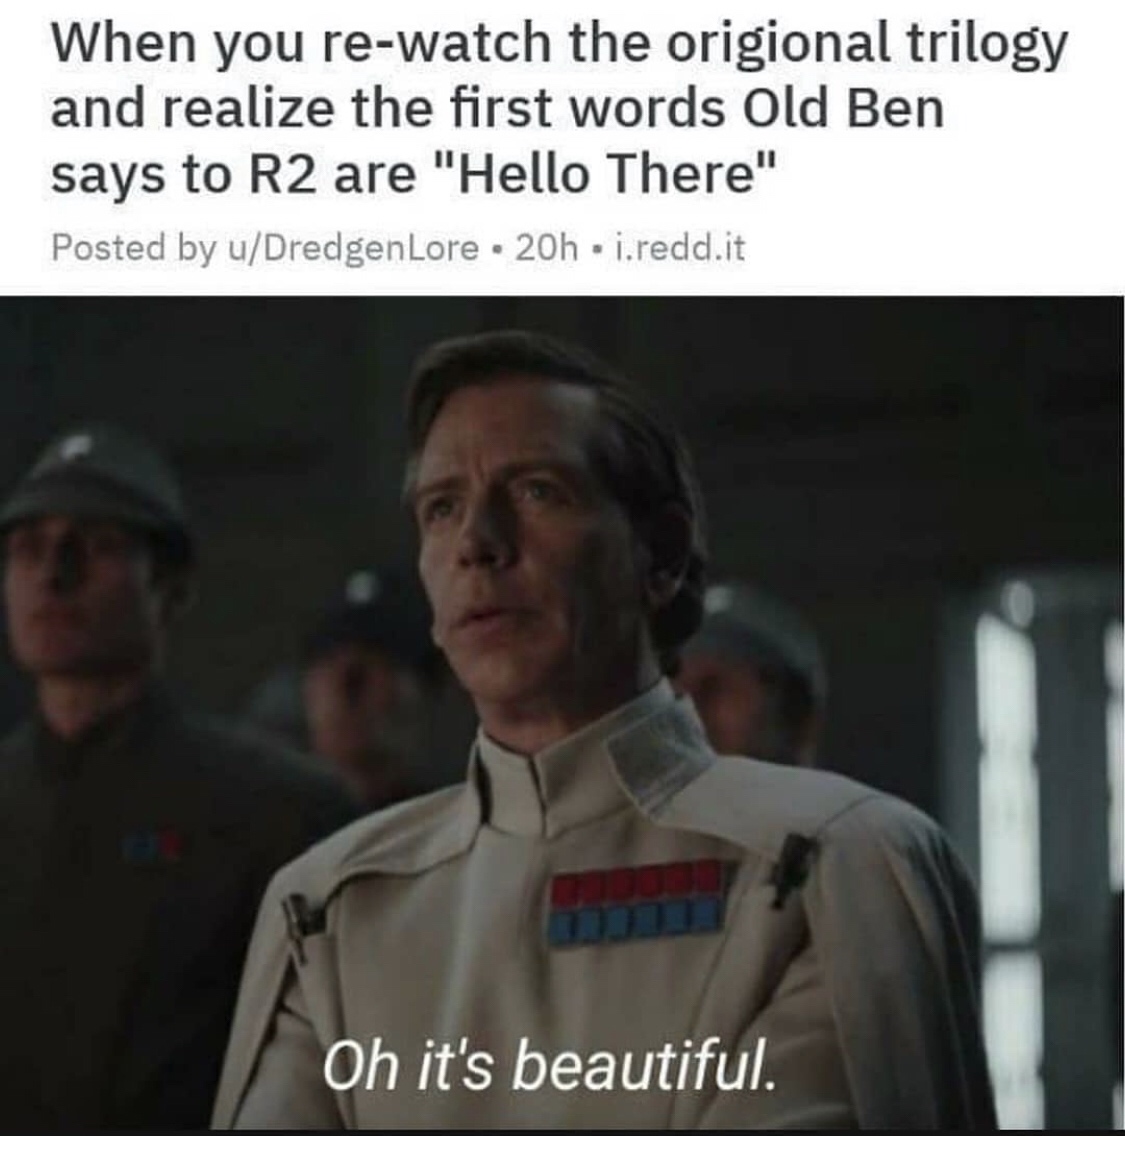 krennic oh it's beautiful - When you rewatch the origional trilogy and realize the first words Old Ben says to R2 are "Hello There" Posted by uDredgenLore 20h i.redd.it Oh it's beautiful.